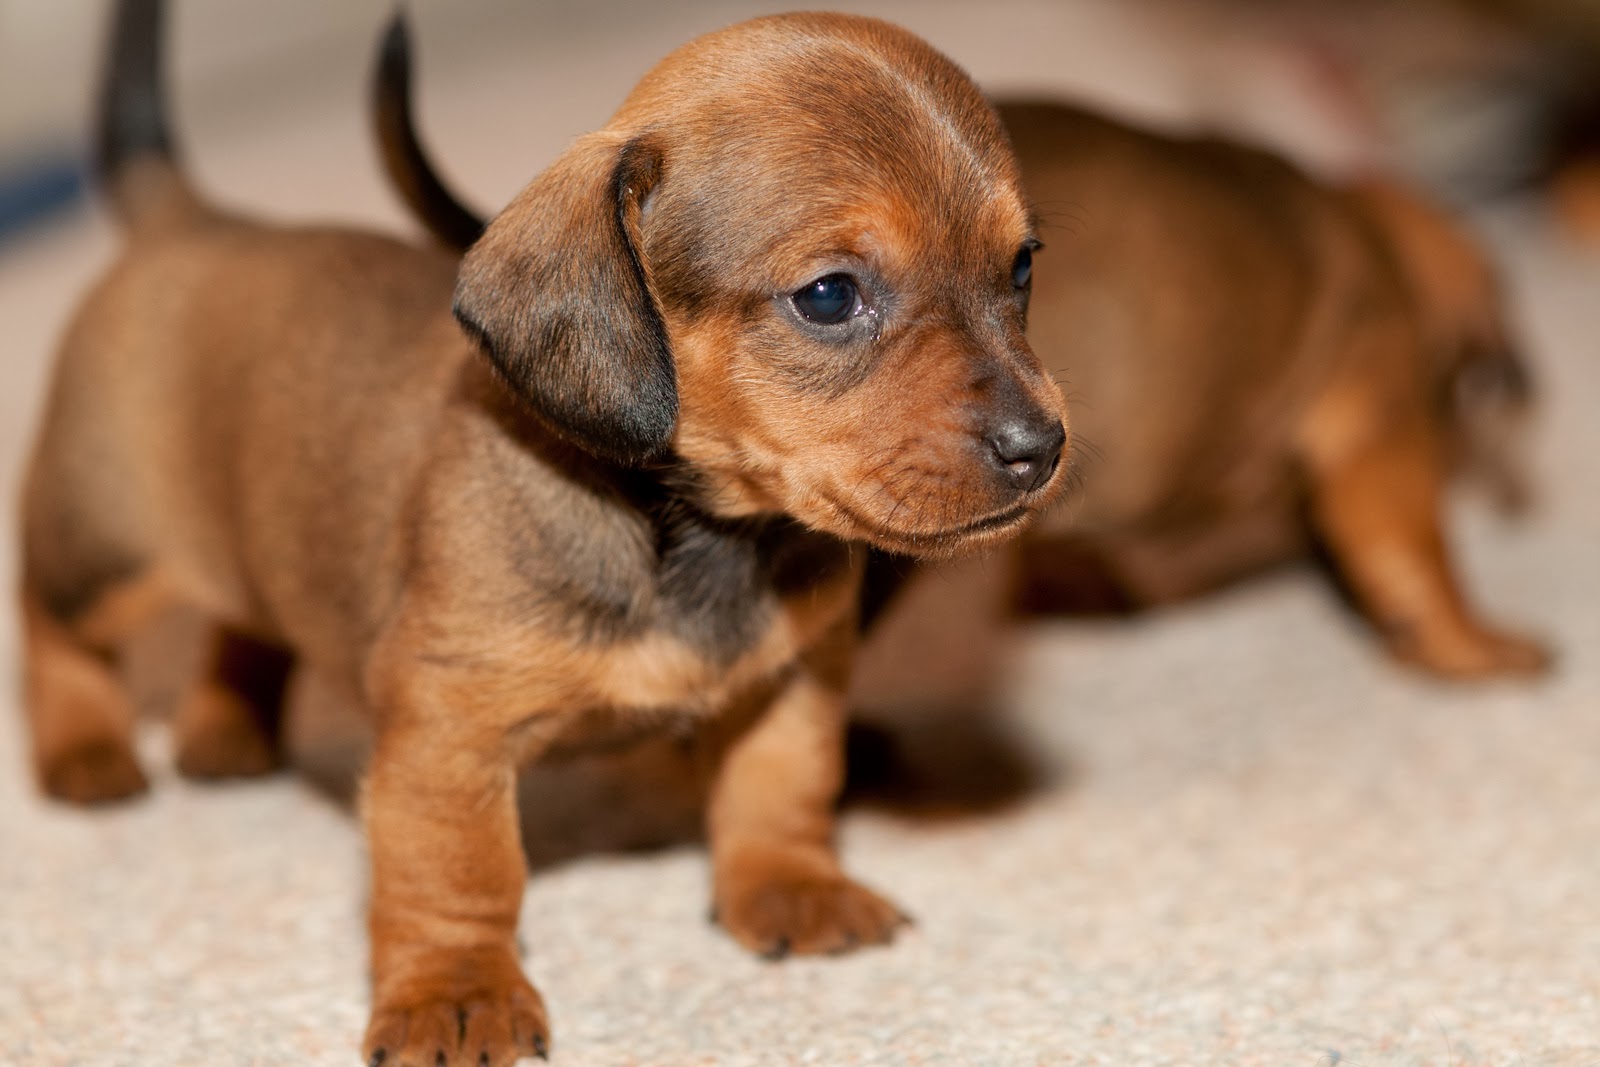 small-2-brown-dachshund-puppies-pictures-and-wallpapers-dachshund-small-breeds-dogs-cute-and-funny.jpg